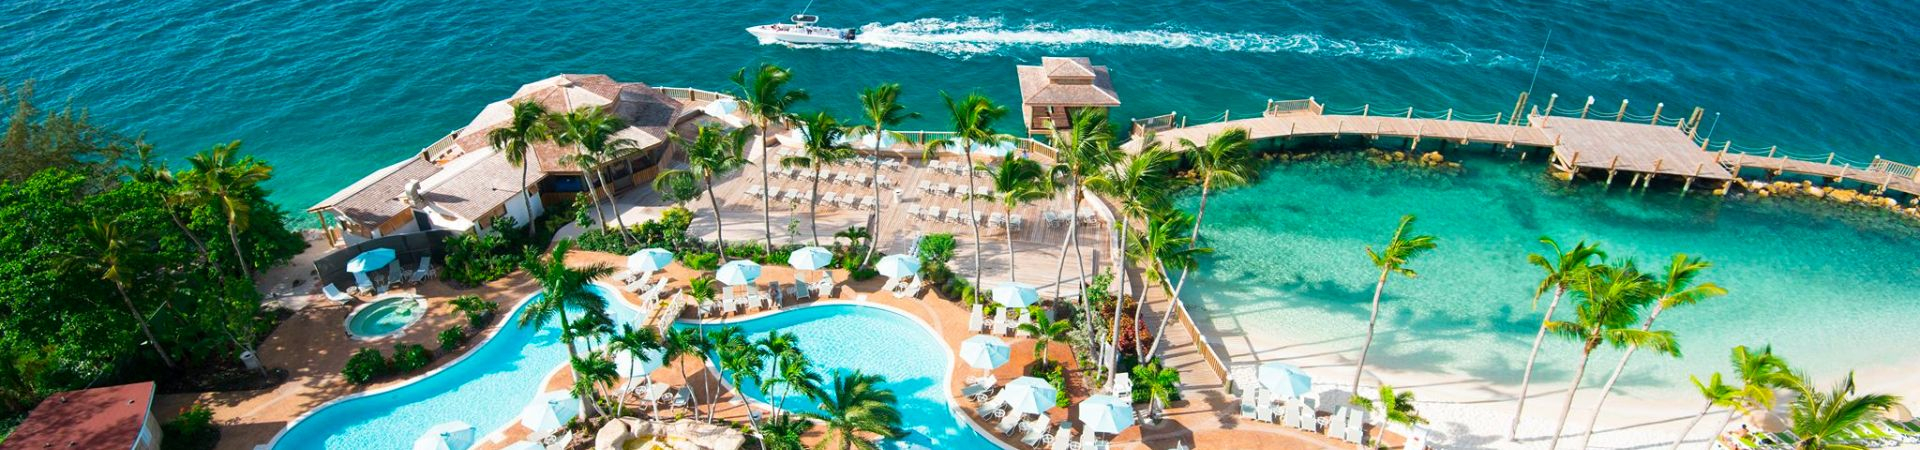 Looking for the best adults only resort for your next holiday? Enjoy peace and privacy with this list of 13 all-inclusive adults only resorts